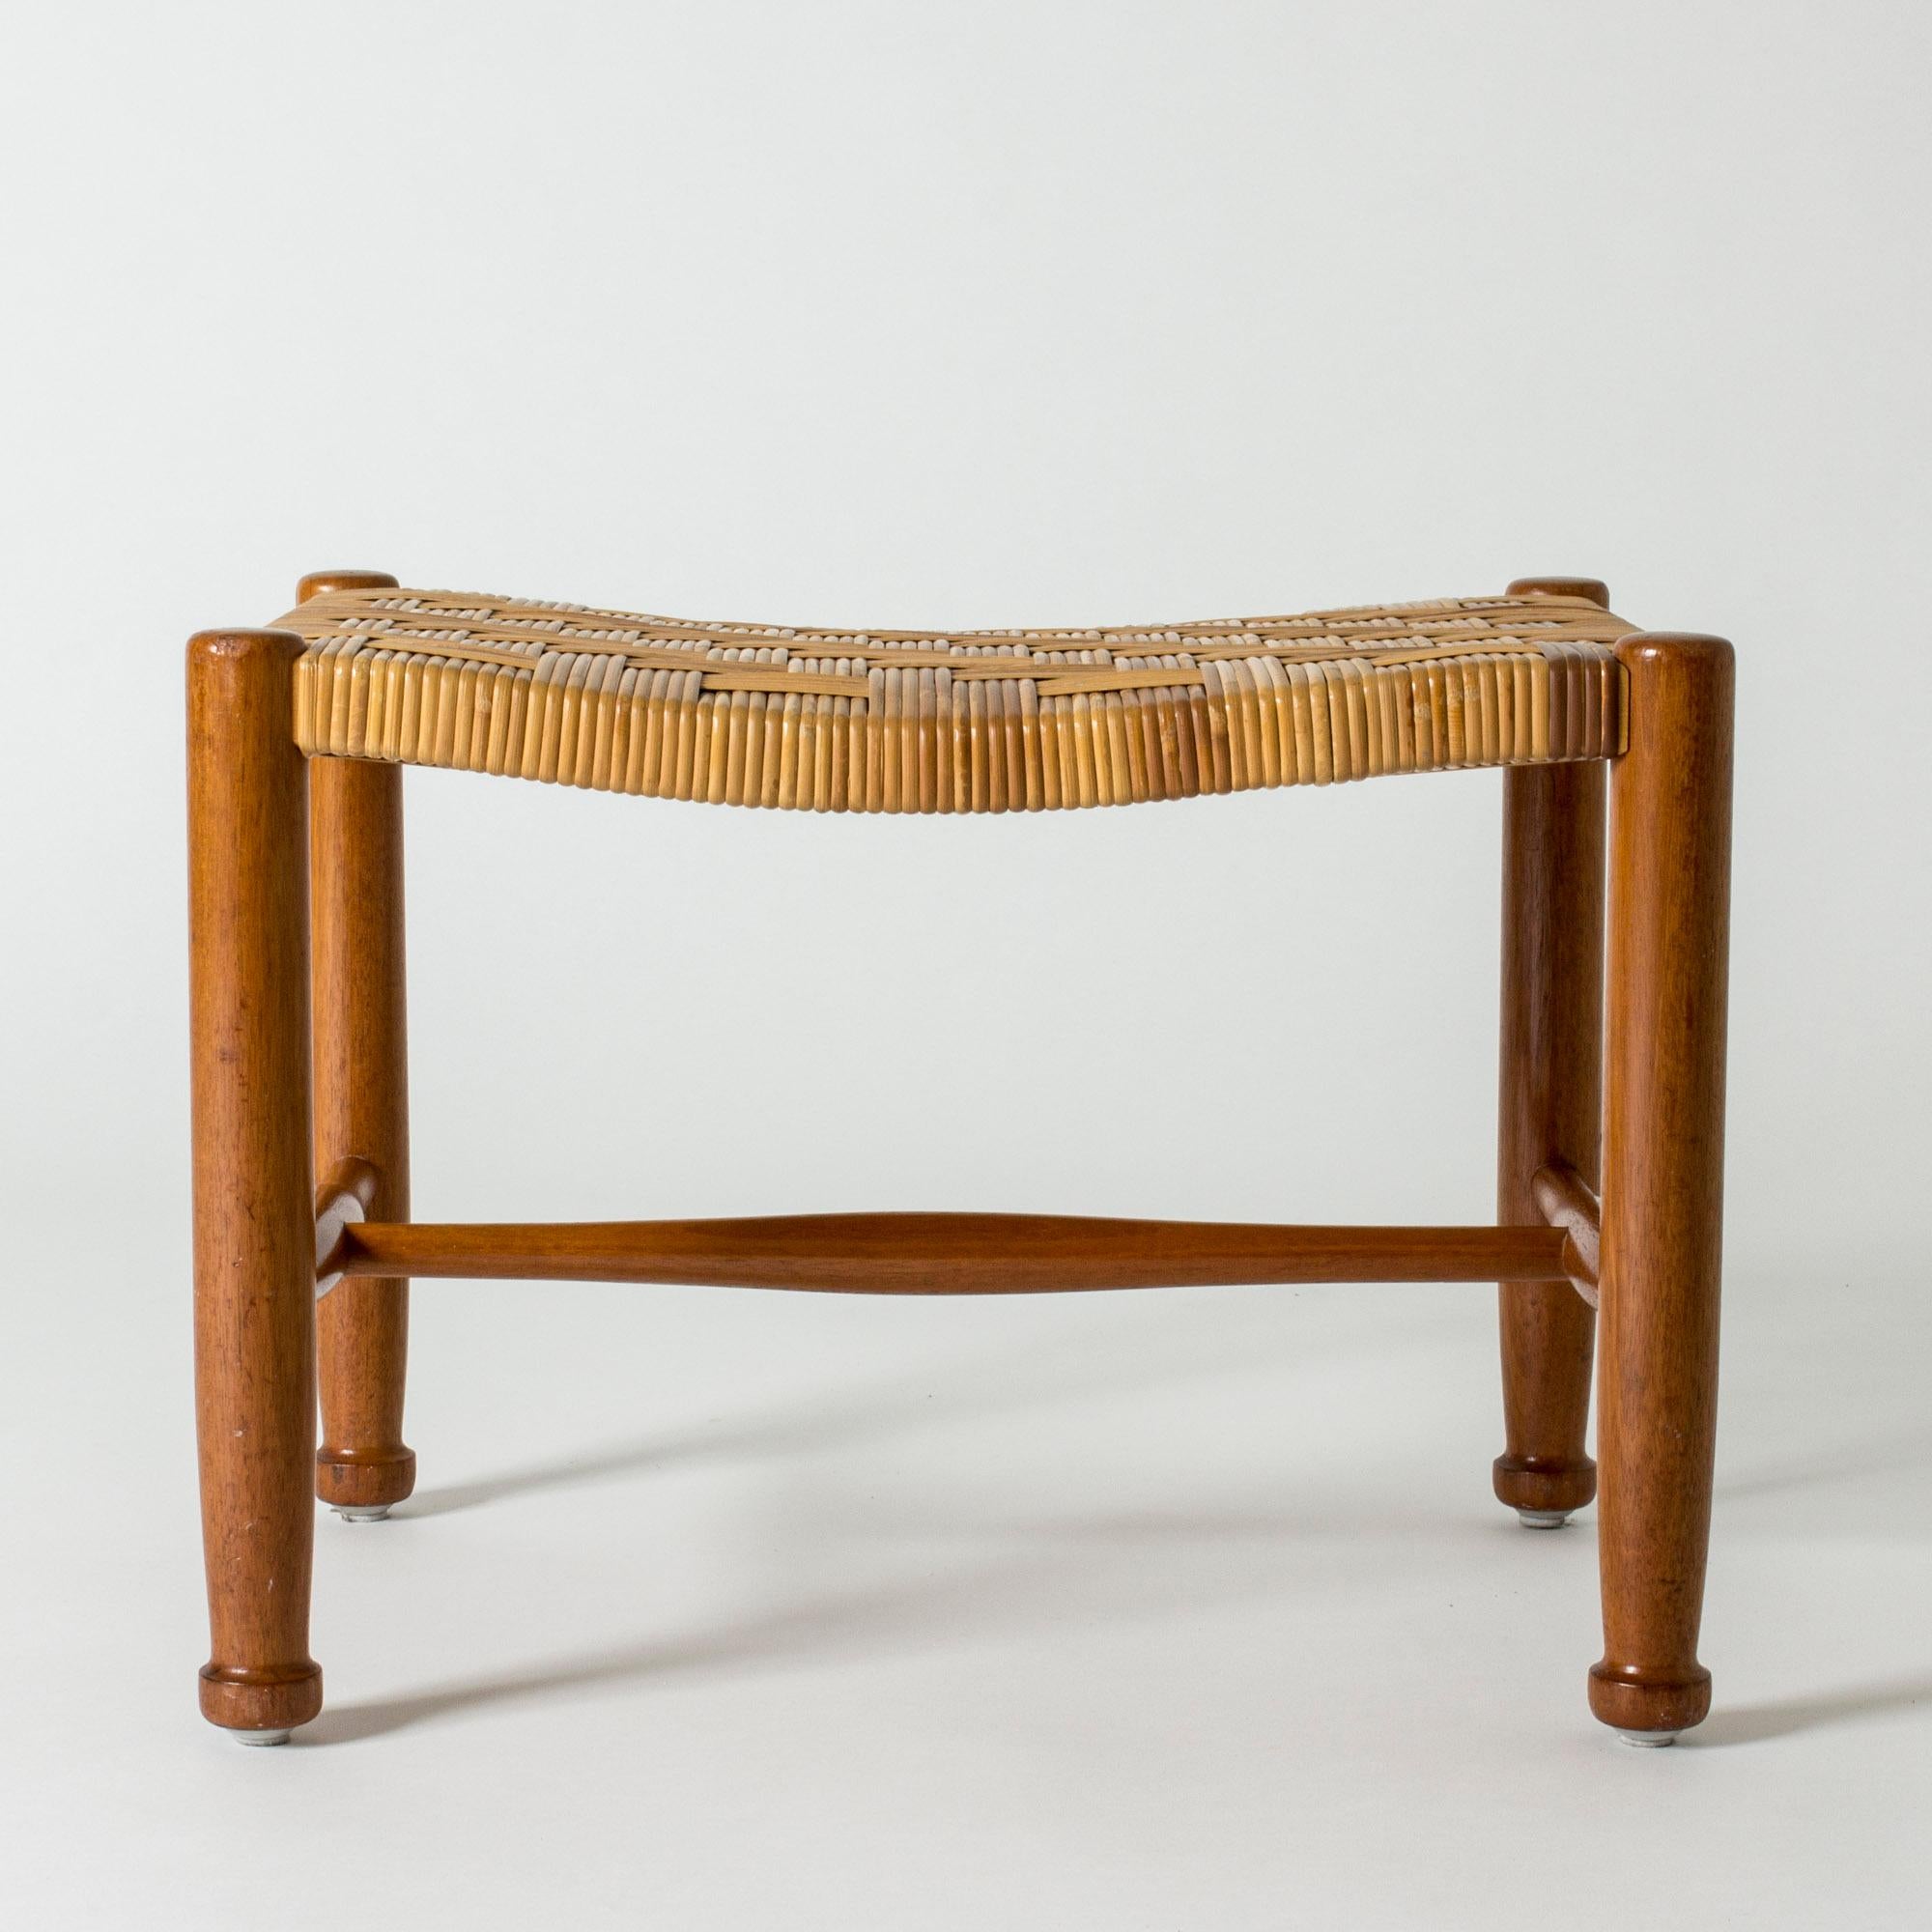 Neat stool by Josef Frank, made from mahogany with elegantly sculpted feet. Rattan seat in a densely wreathed pattern.